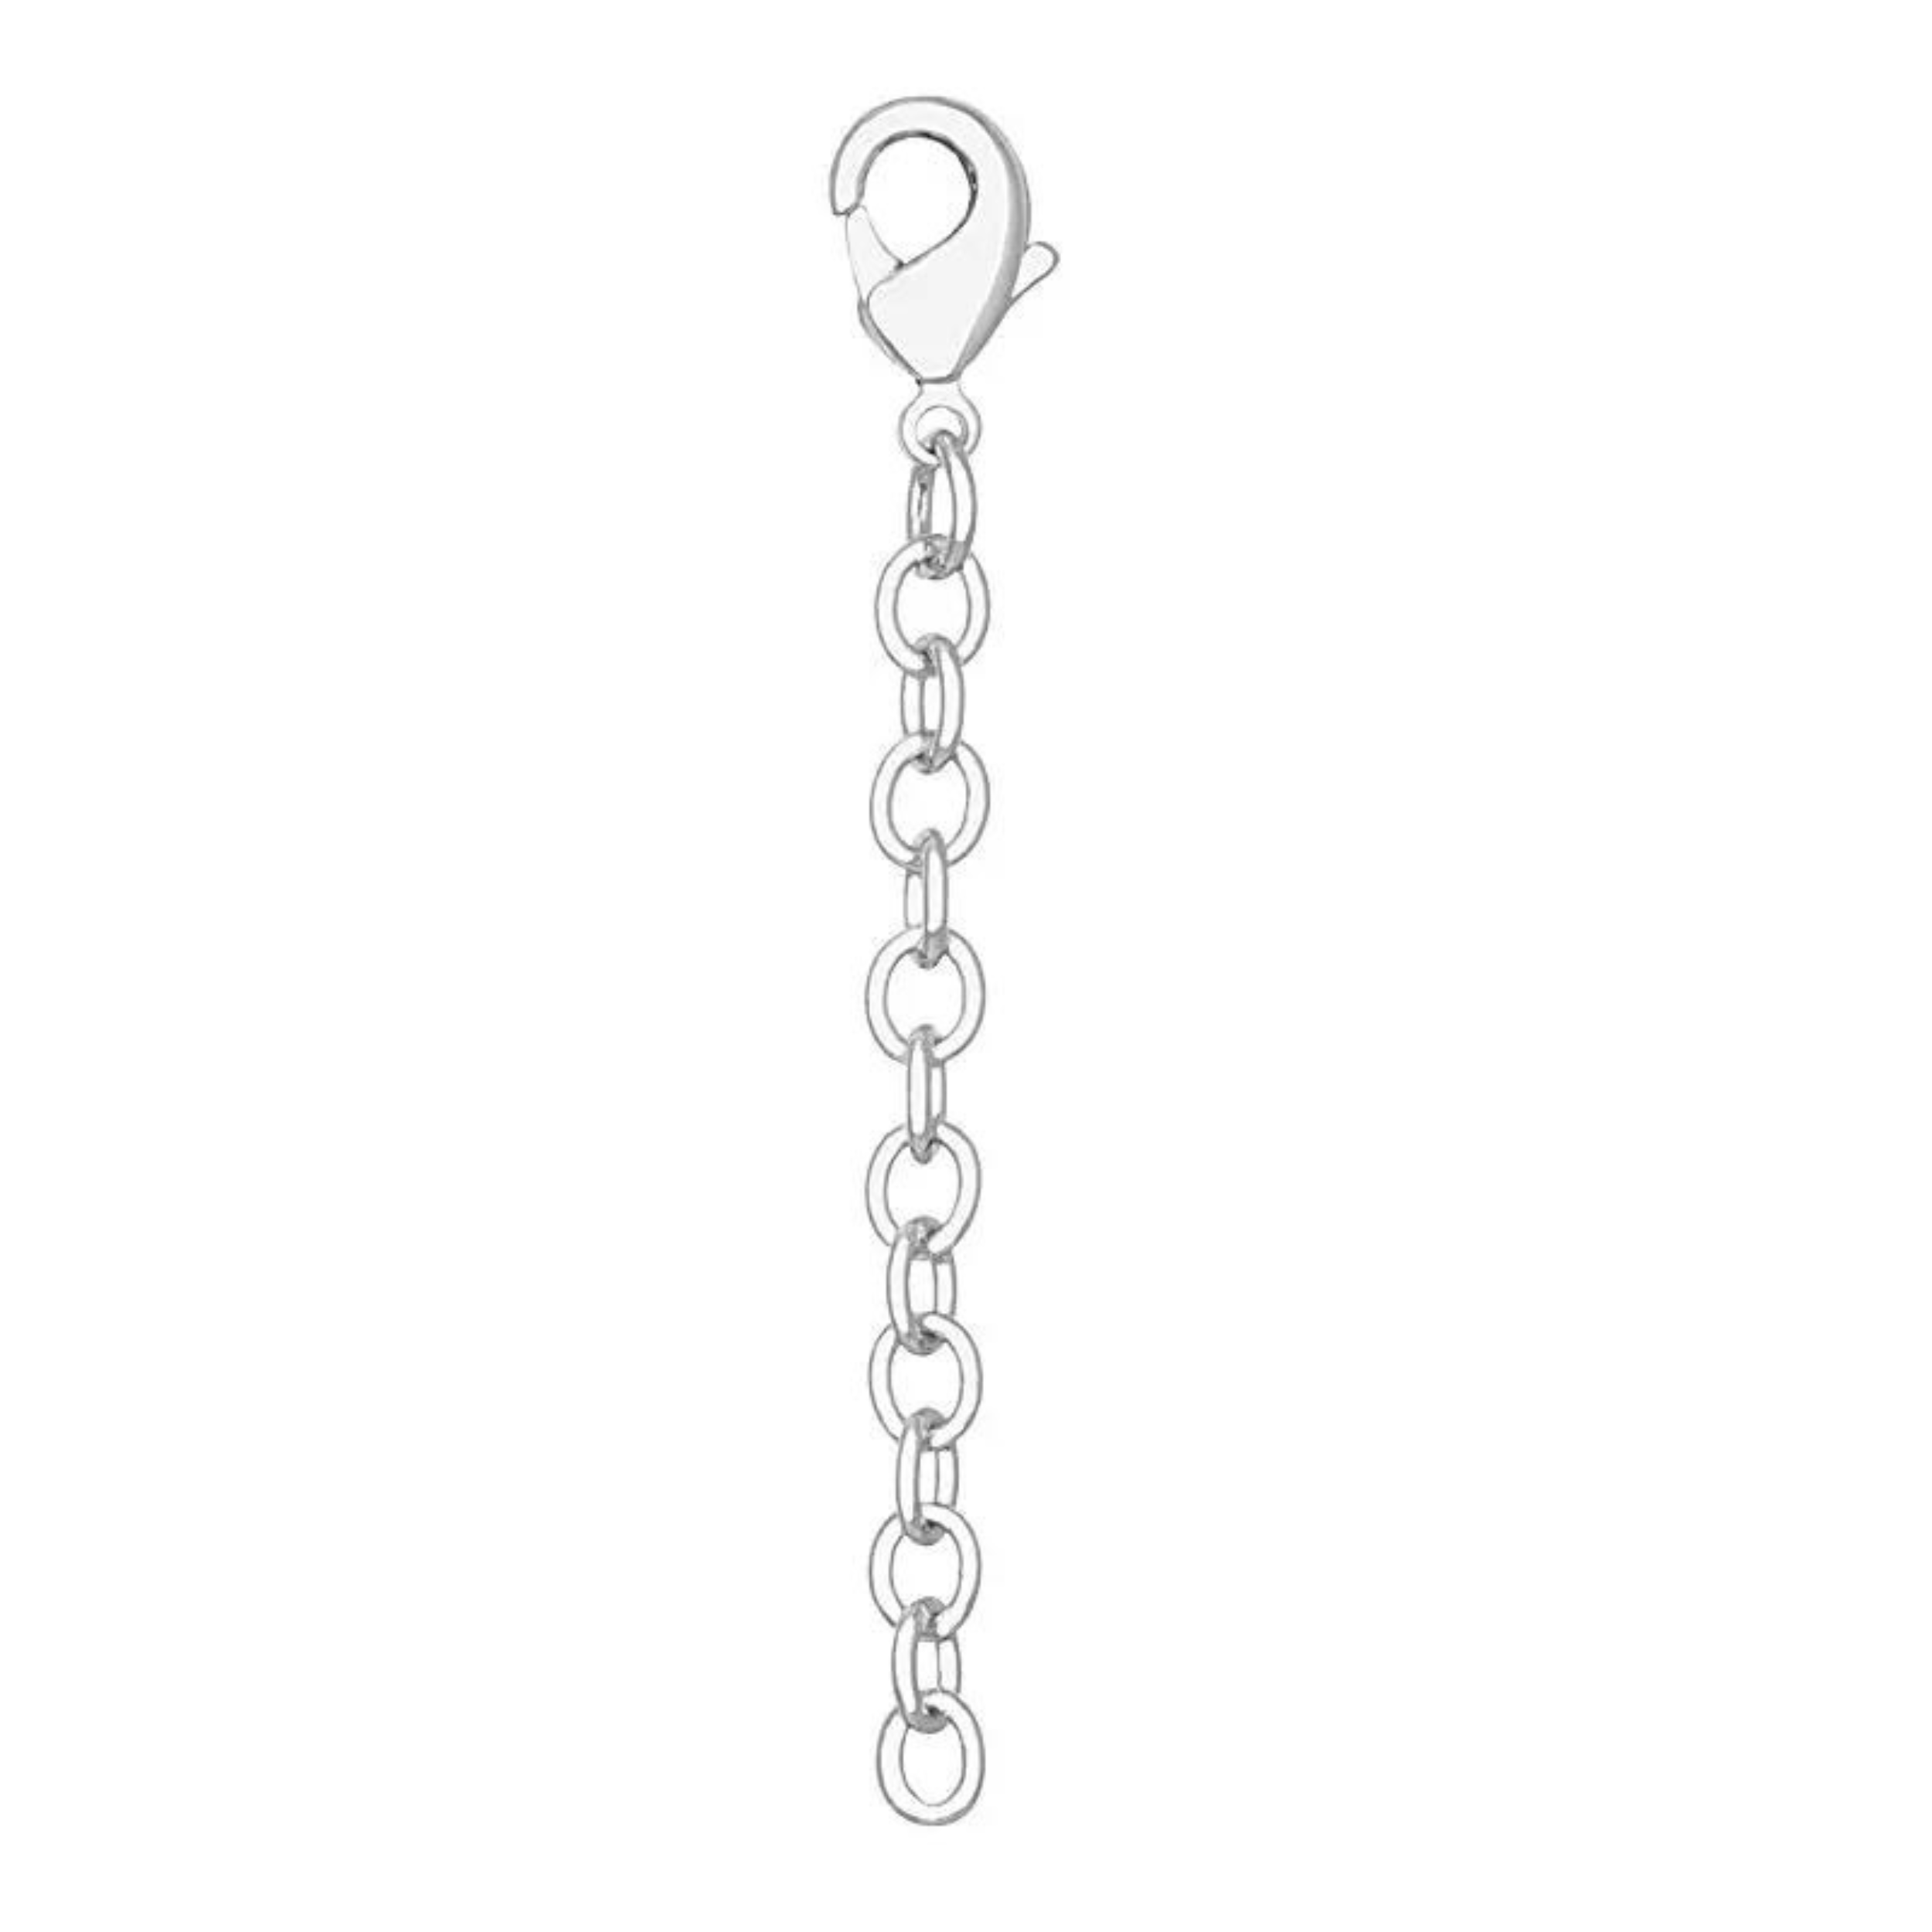 Silver 2 inch necklace extender with a lobser clasp, pictured on a white background.